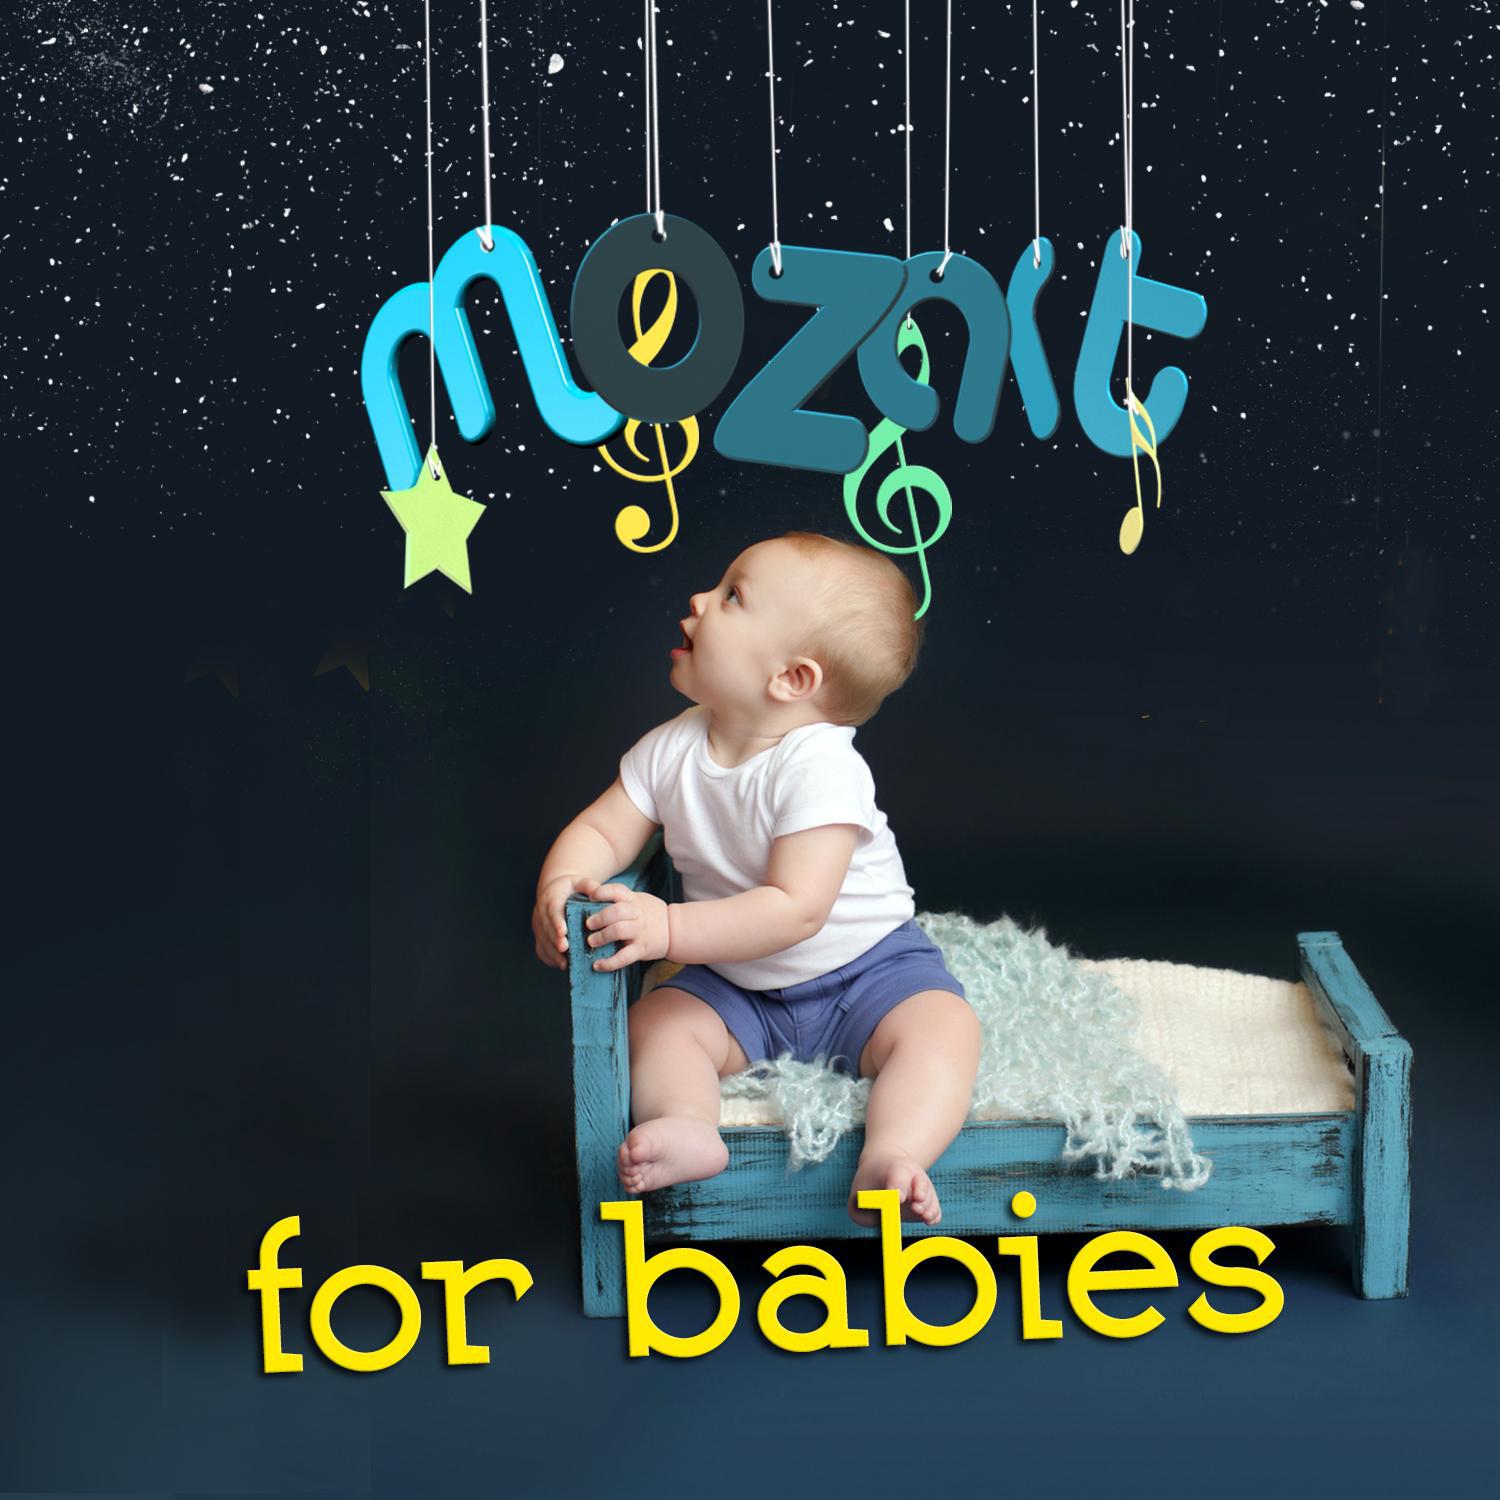 Mozart for Babies